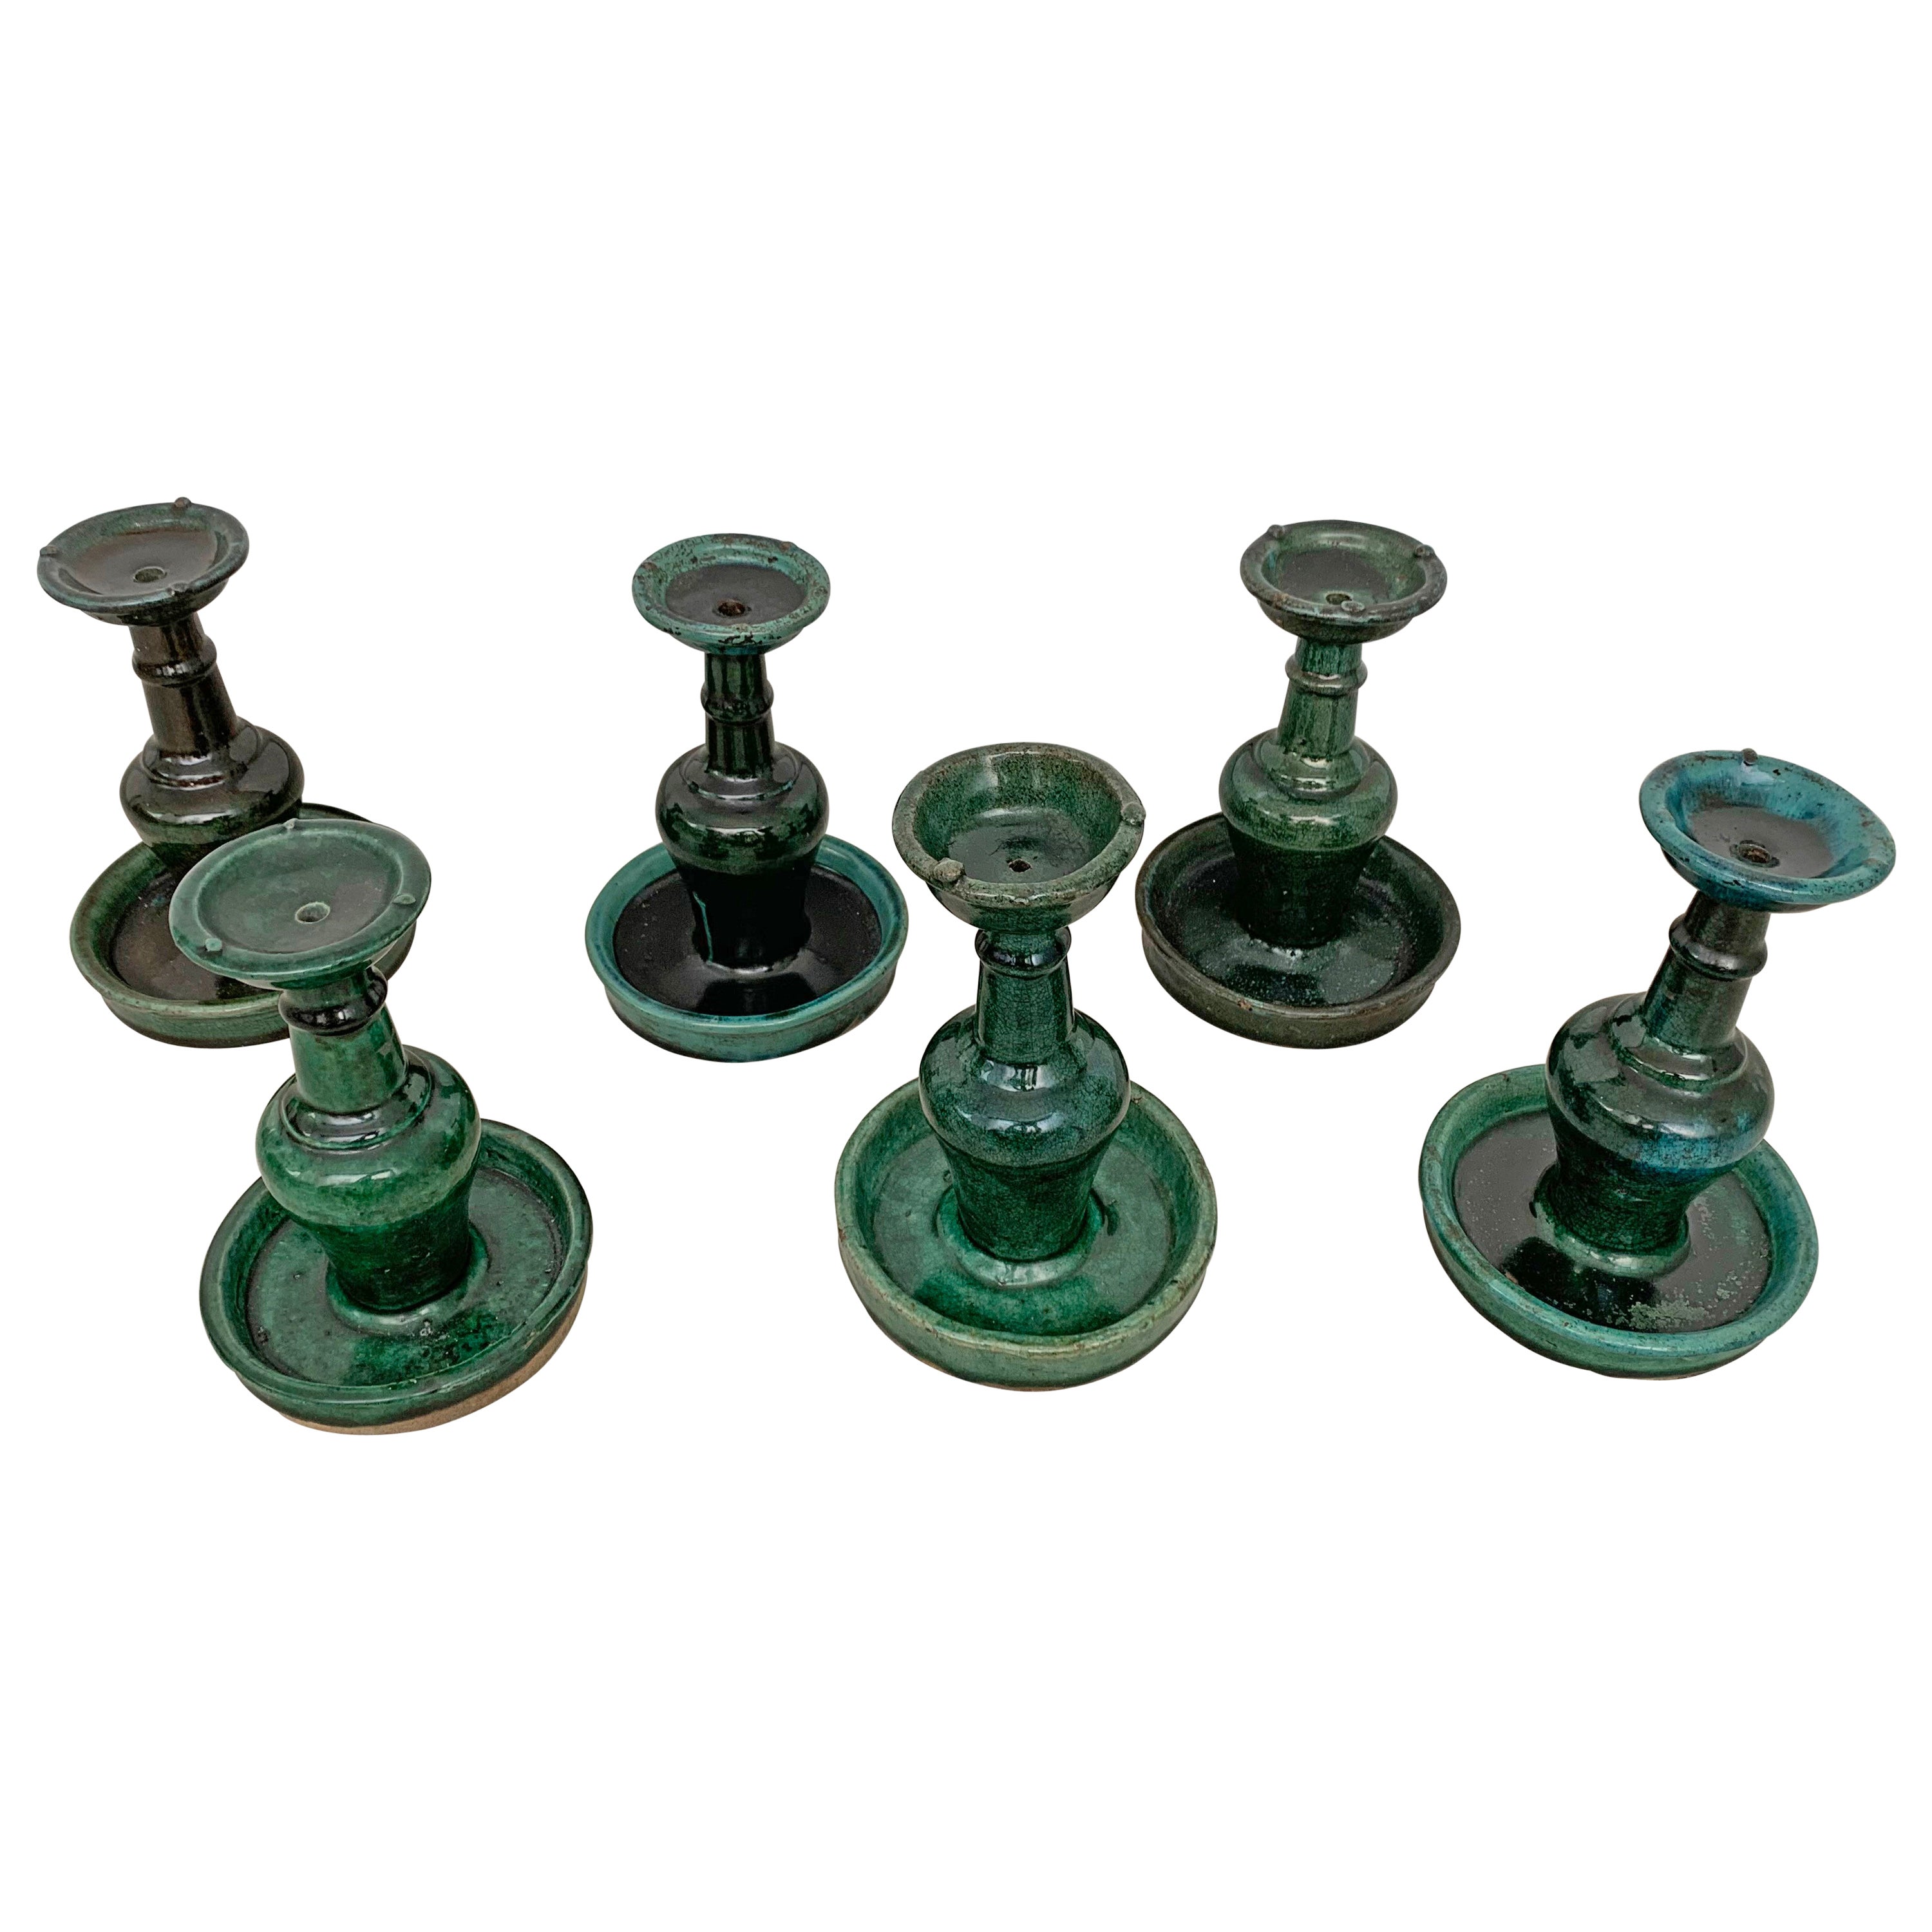 Chinese 'Shiwan' Candleholder / Oil Lamp Set of 6, Green-Glazed, c. 1900 For Sale